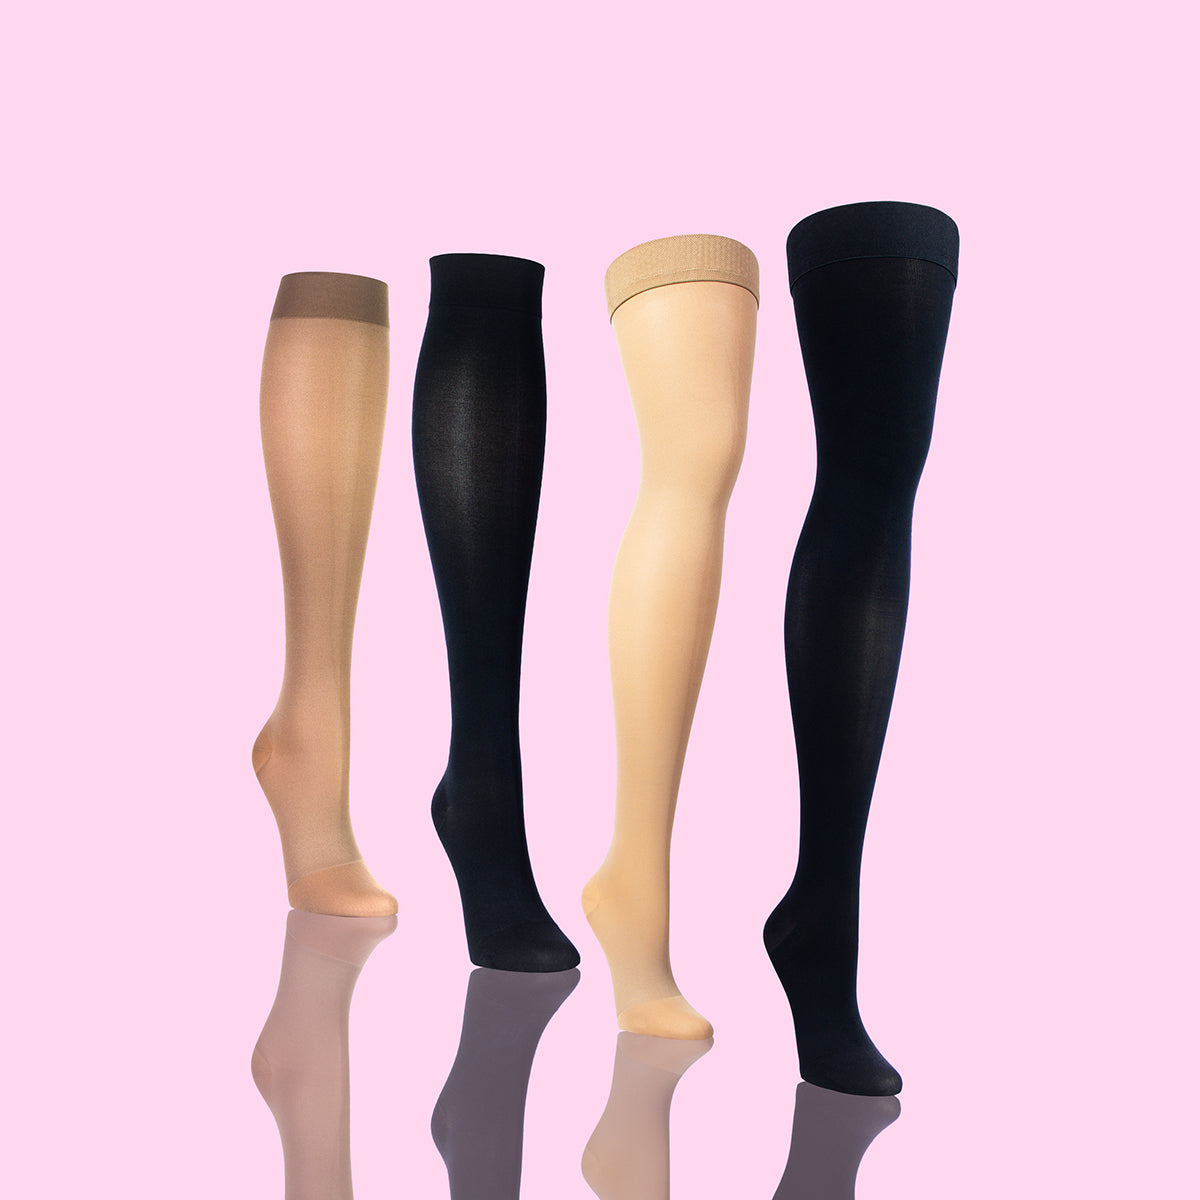 Women's Compression Socks With Image Showing All Colors And Styles: Black, Skin, Knee-High, Thigh-High - Cool Pink Background